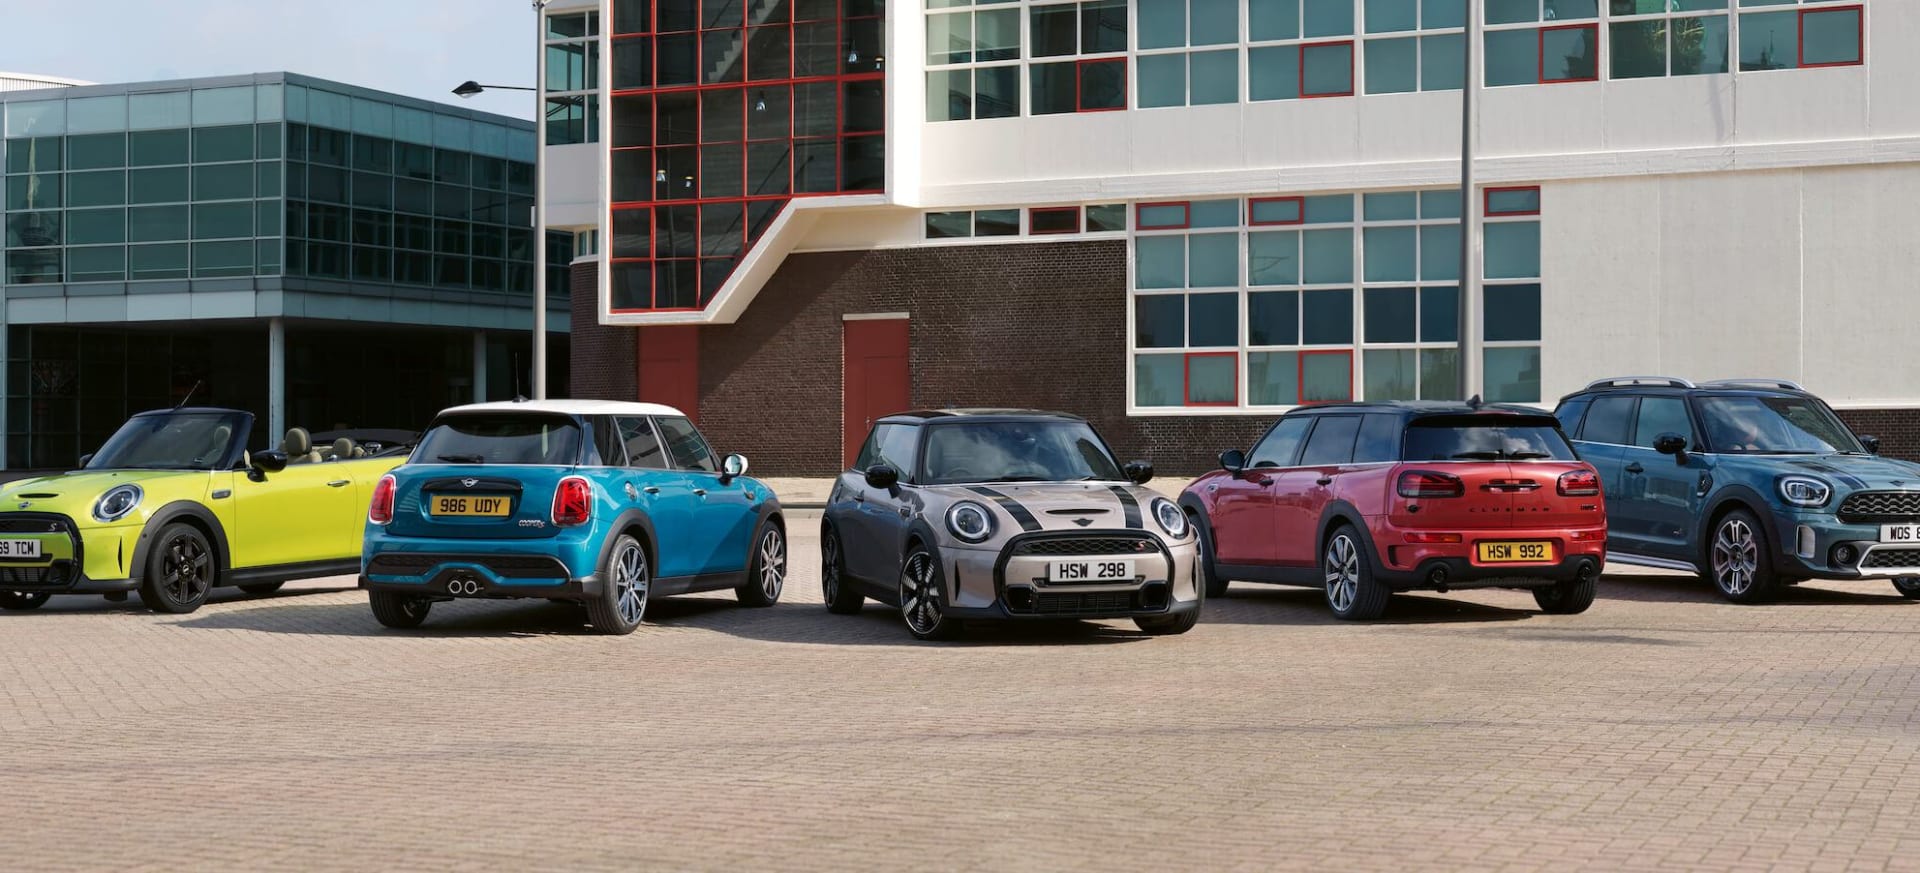 WE WANT YOUR MINI